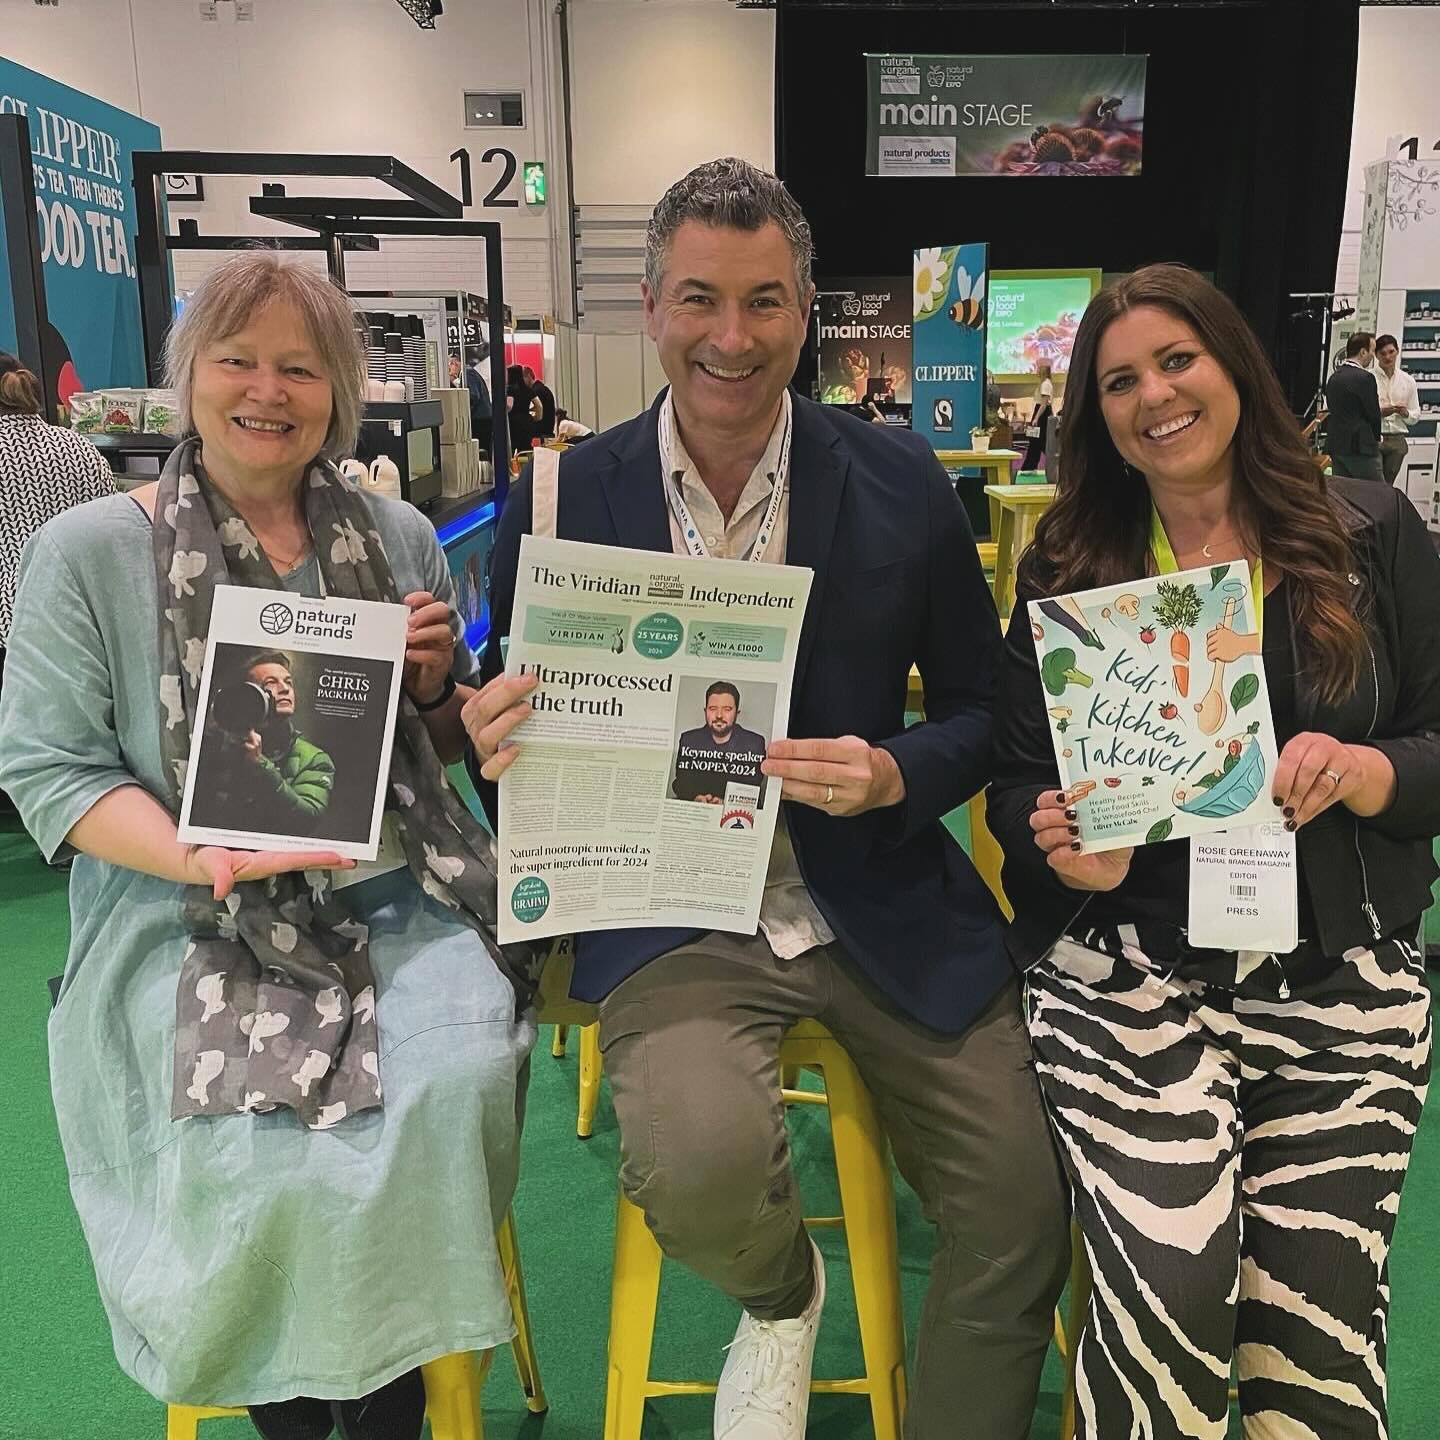 The sign of a good trade show is when your camera roll is virtually empty 📸

But we did capture these memories: @viridiannutrition @cherylthallon @olivermccabe.hubblehealth @attitude_living @therapyorganics @yourgut_health @planetorganic @obvs_skinc